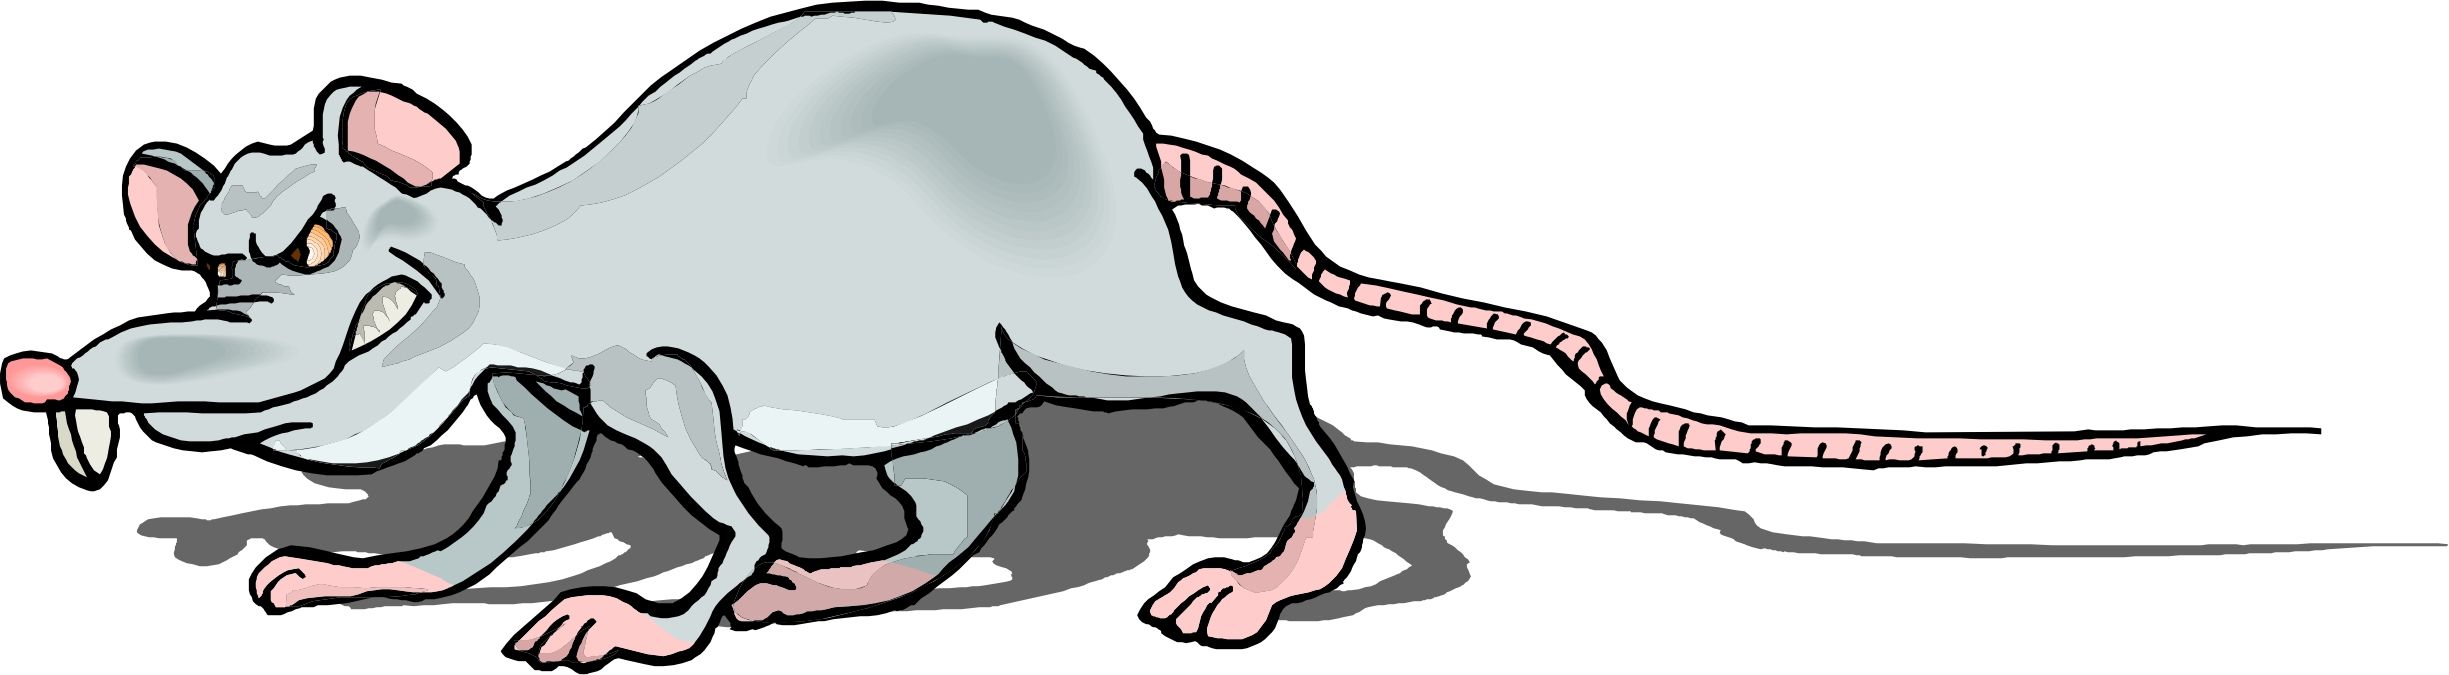 angry rat clipart